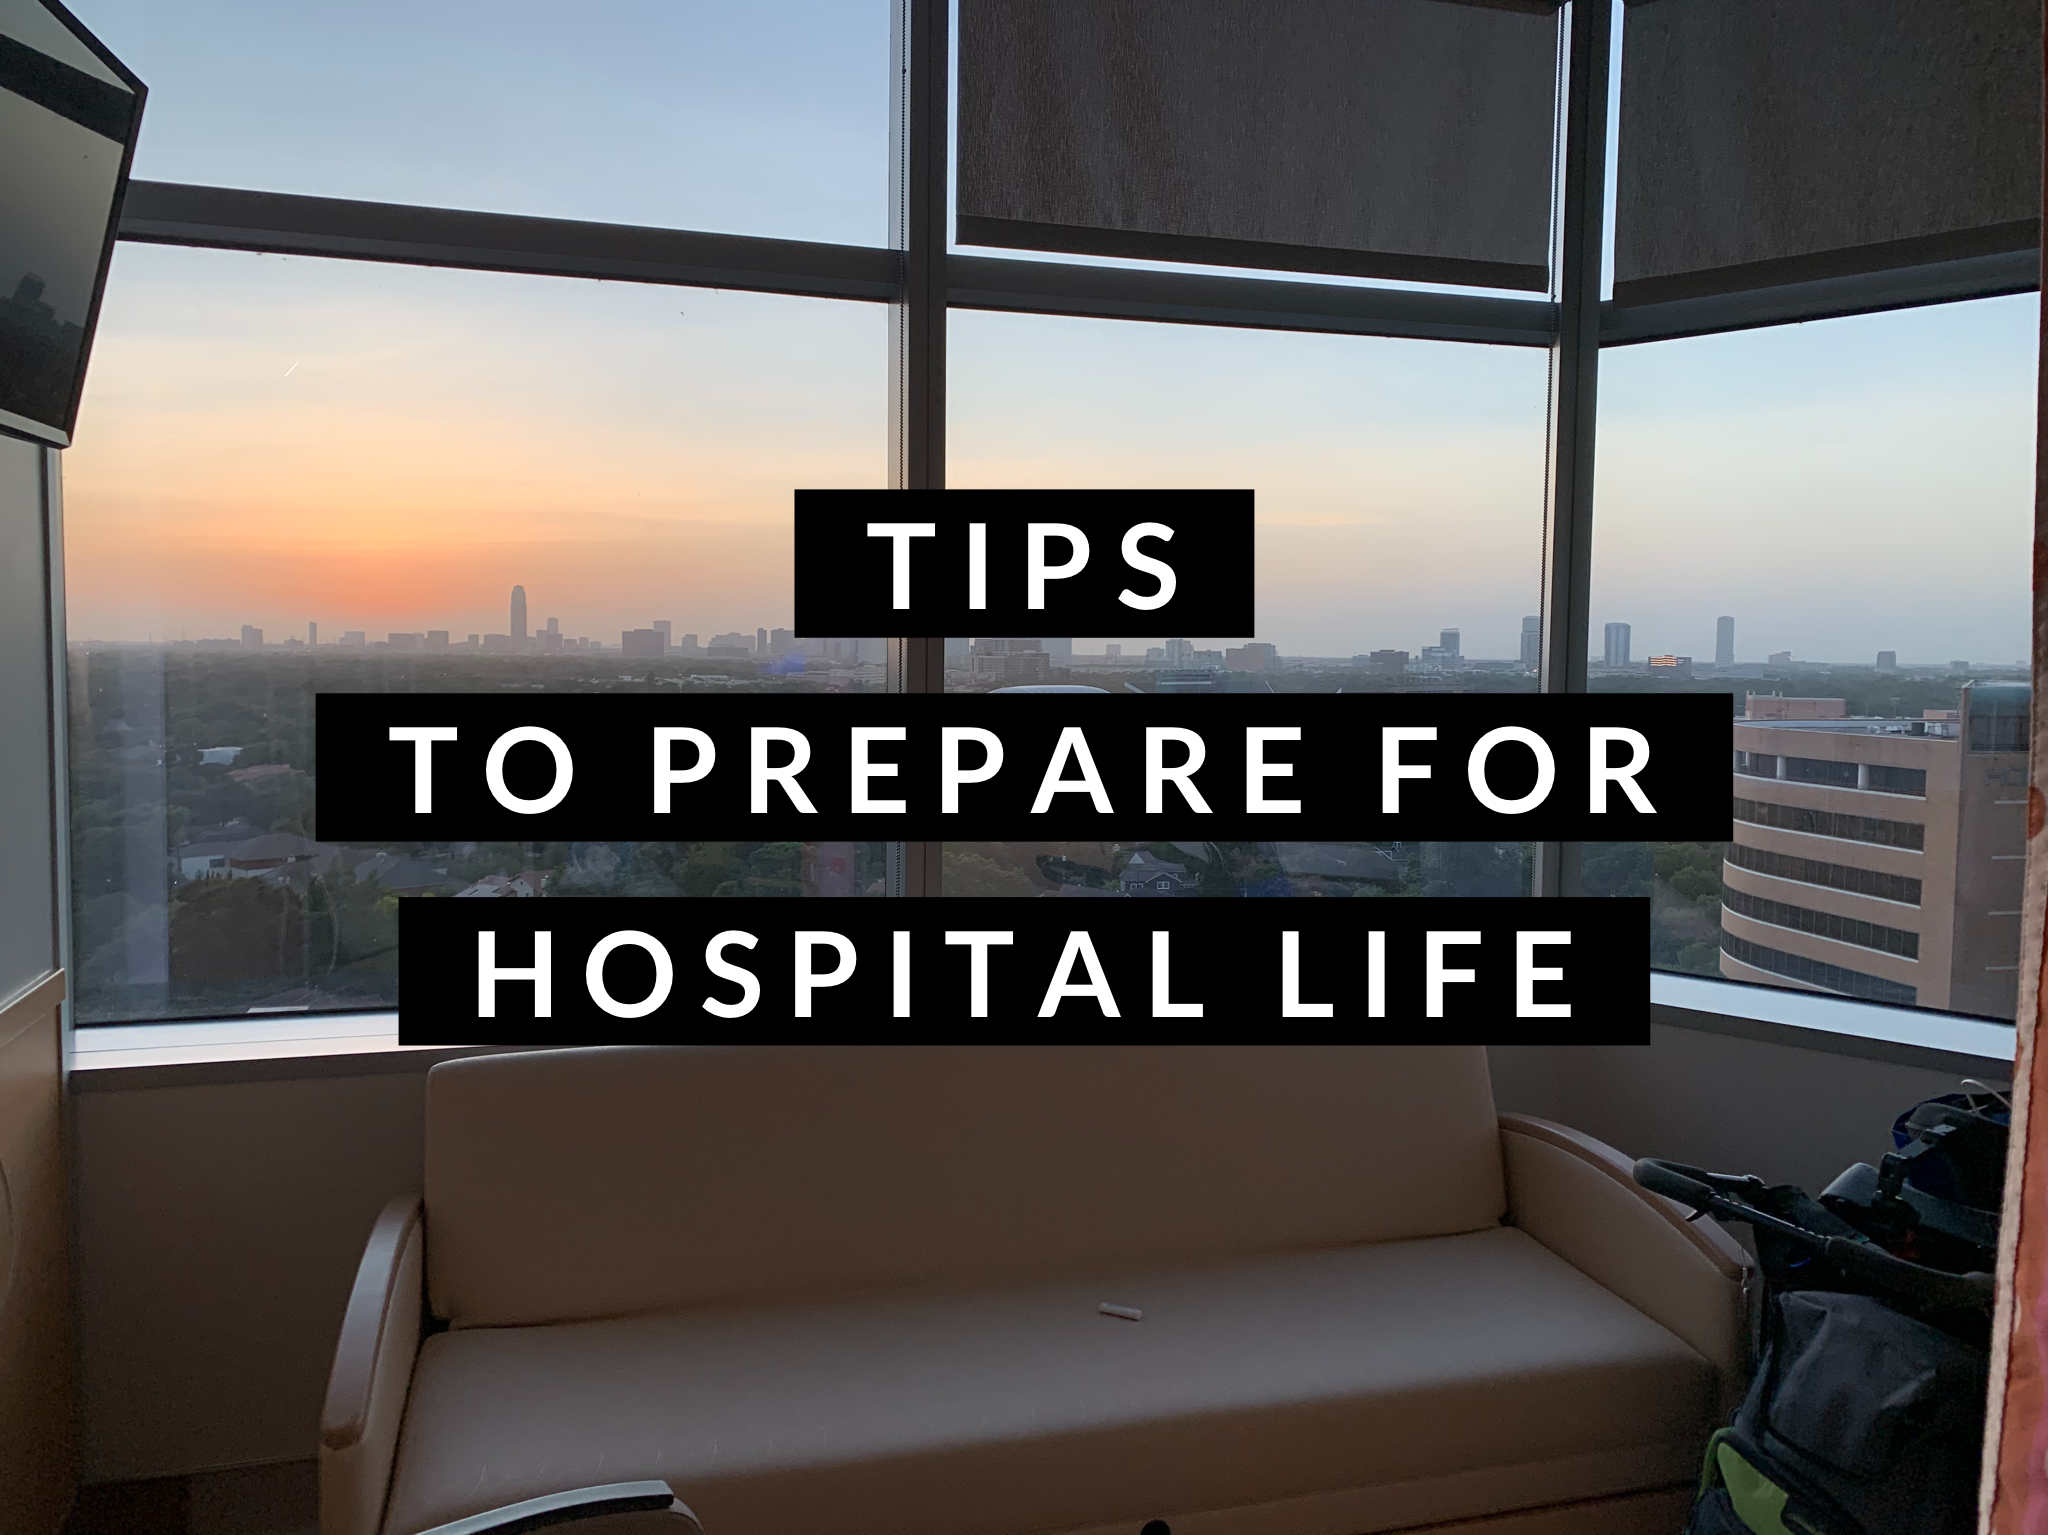 tip to prepare for hospital life